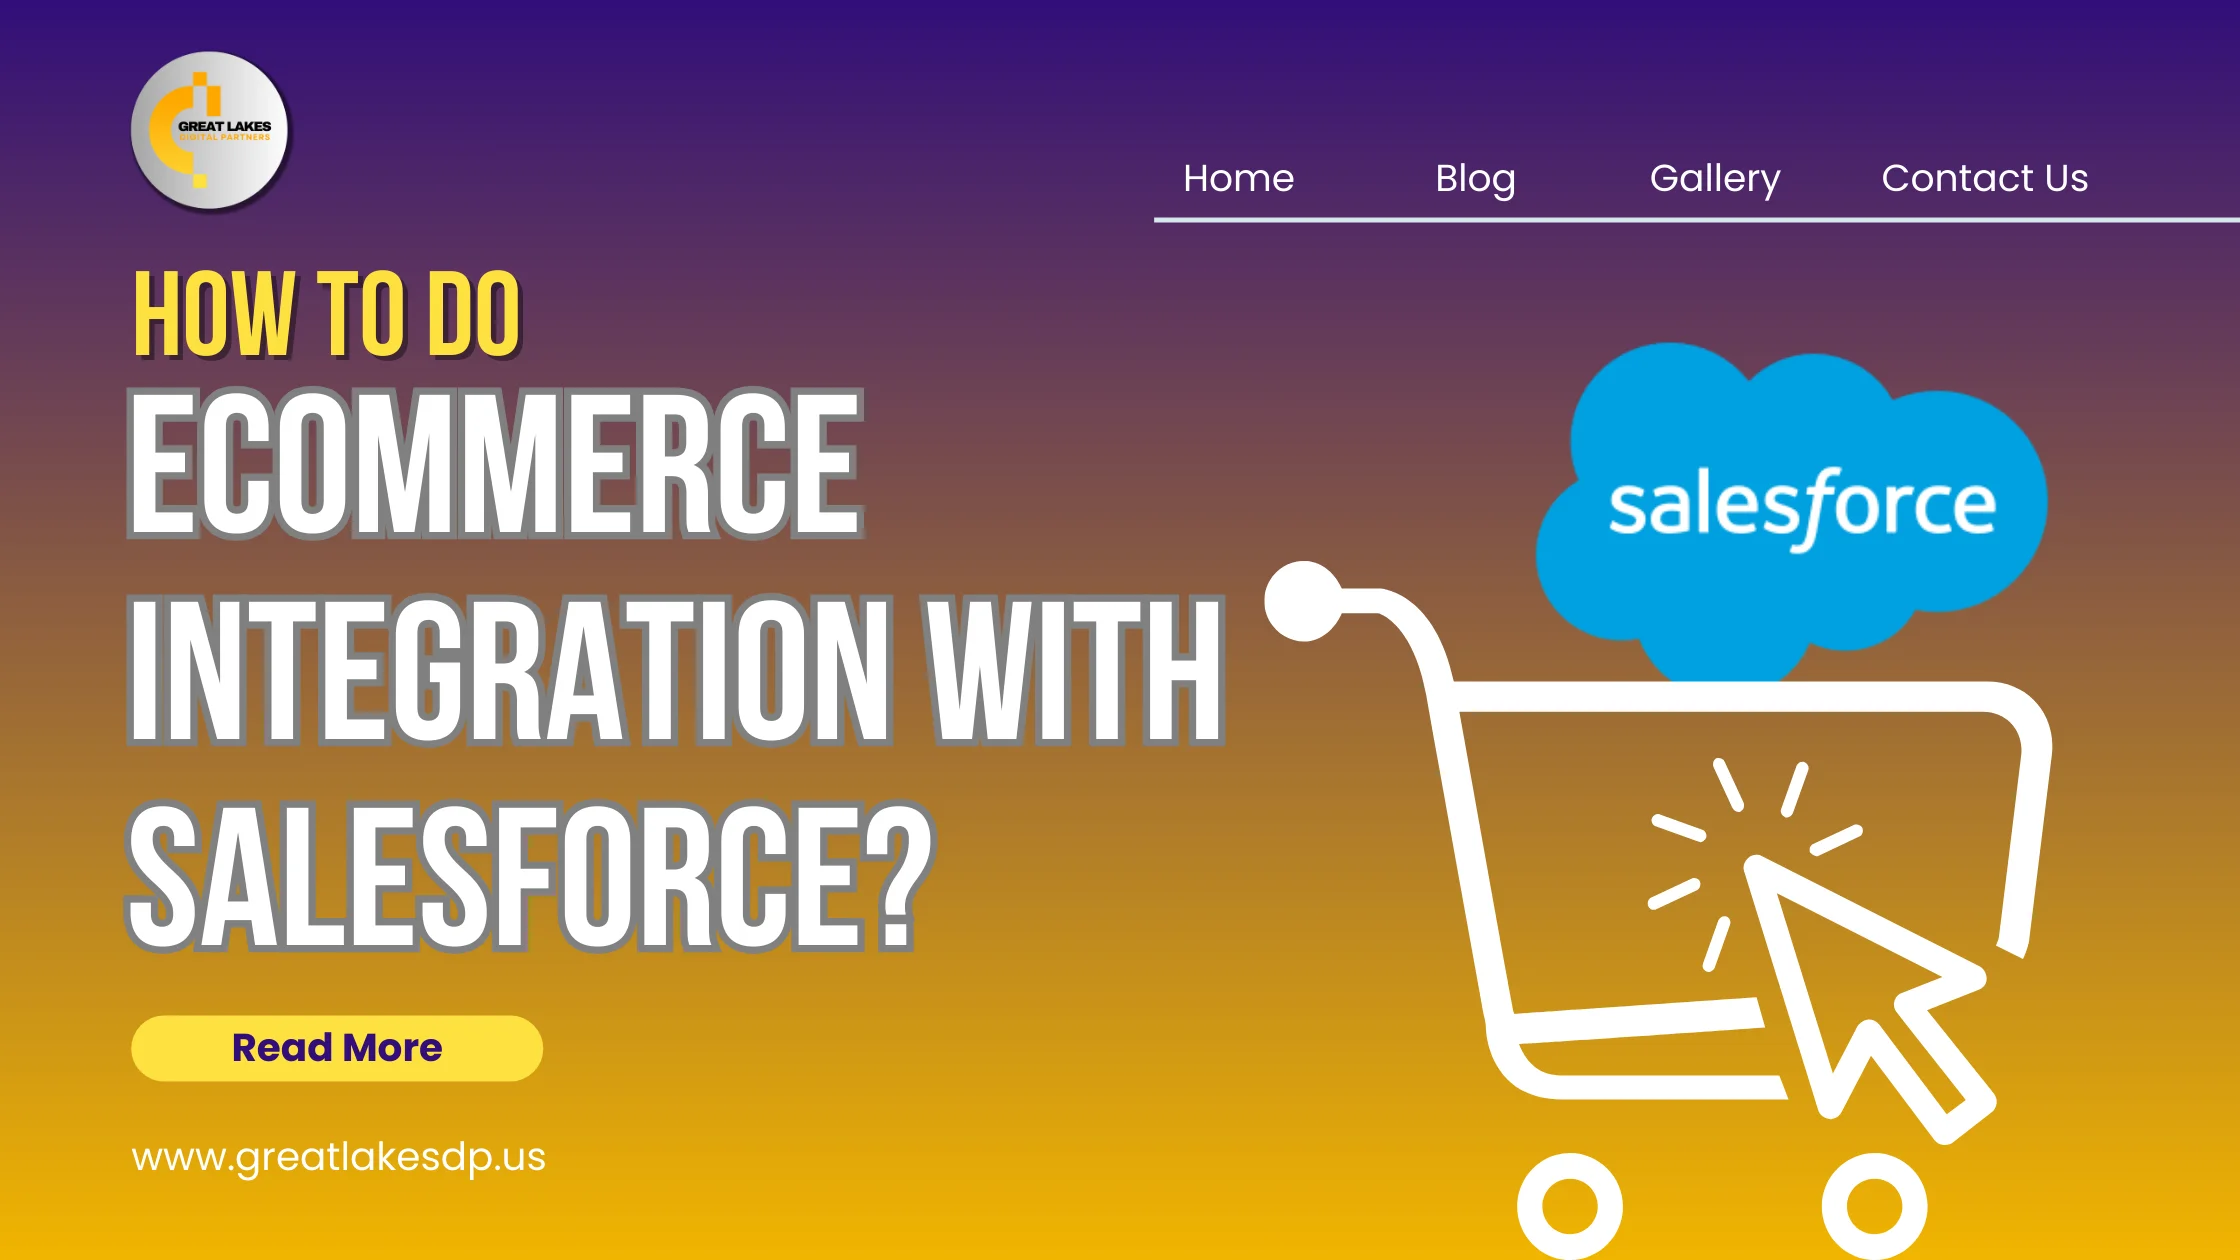 Ecommerce Integration with Salesforce?